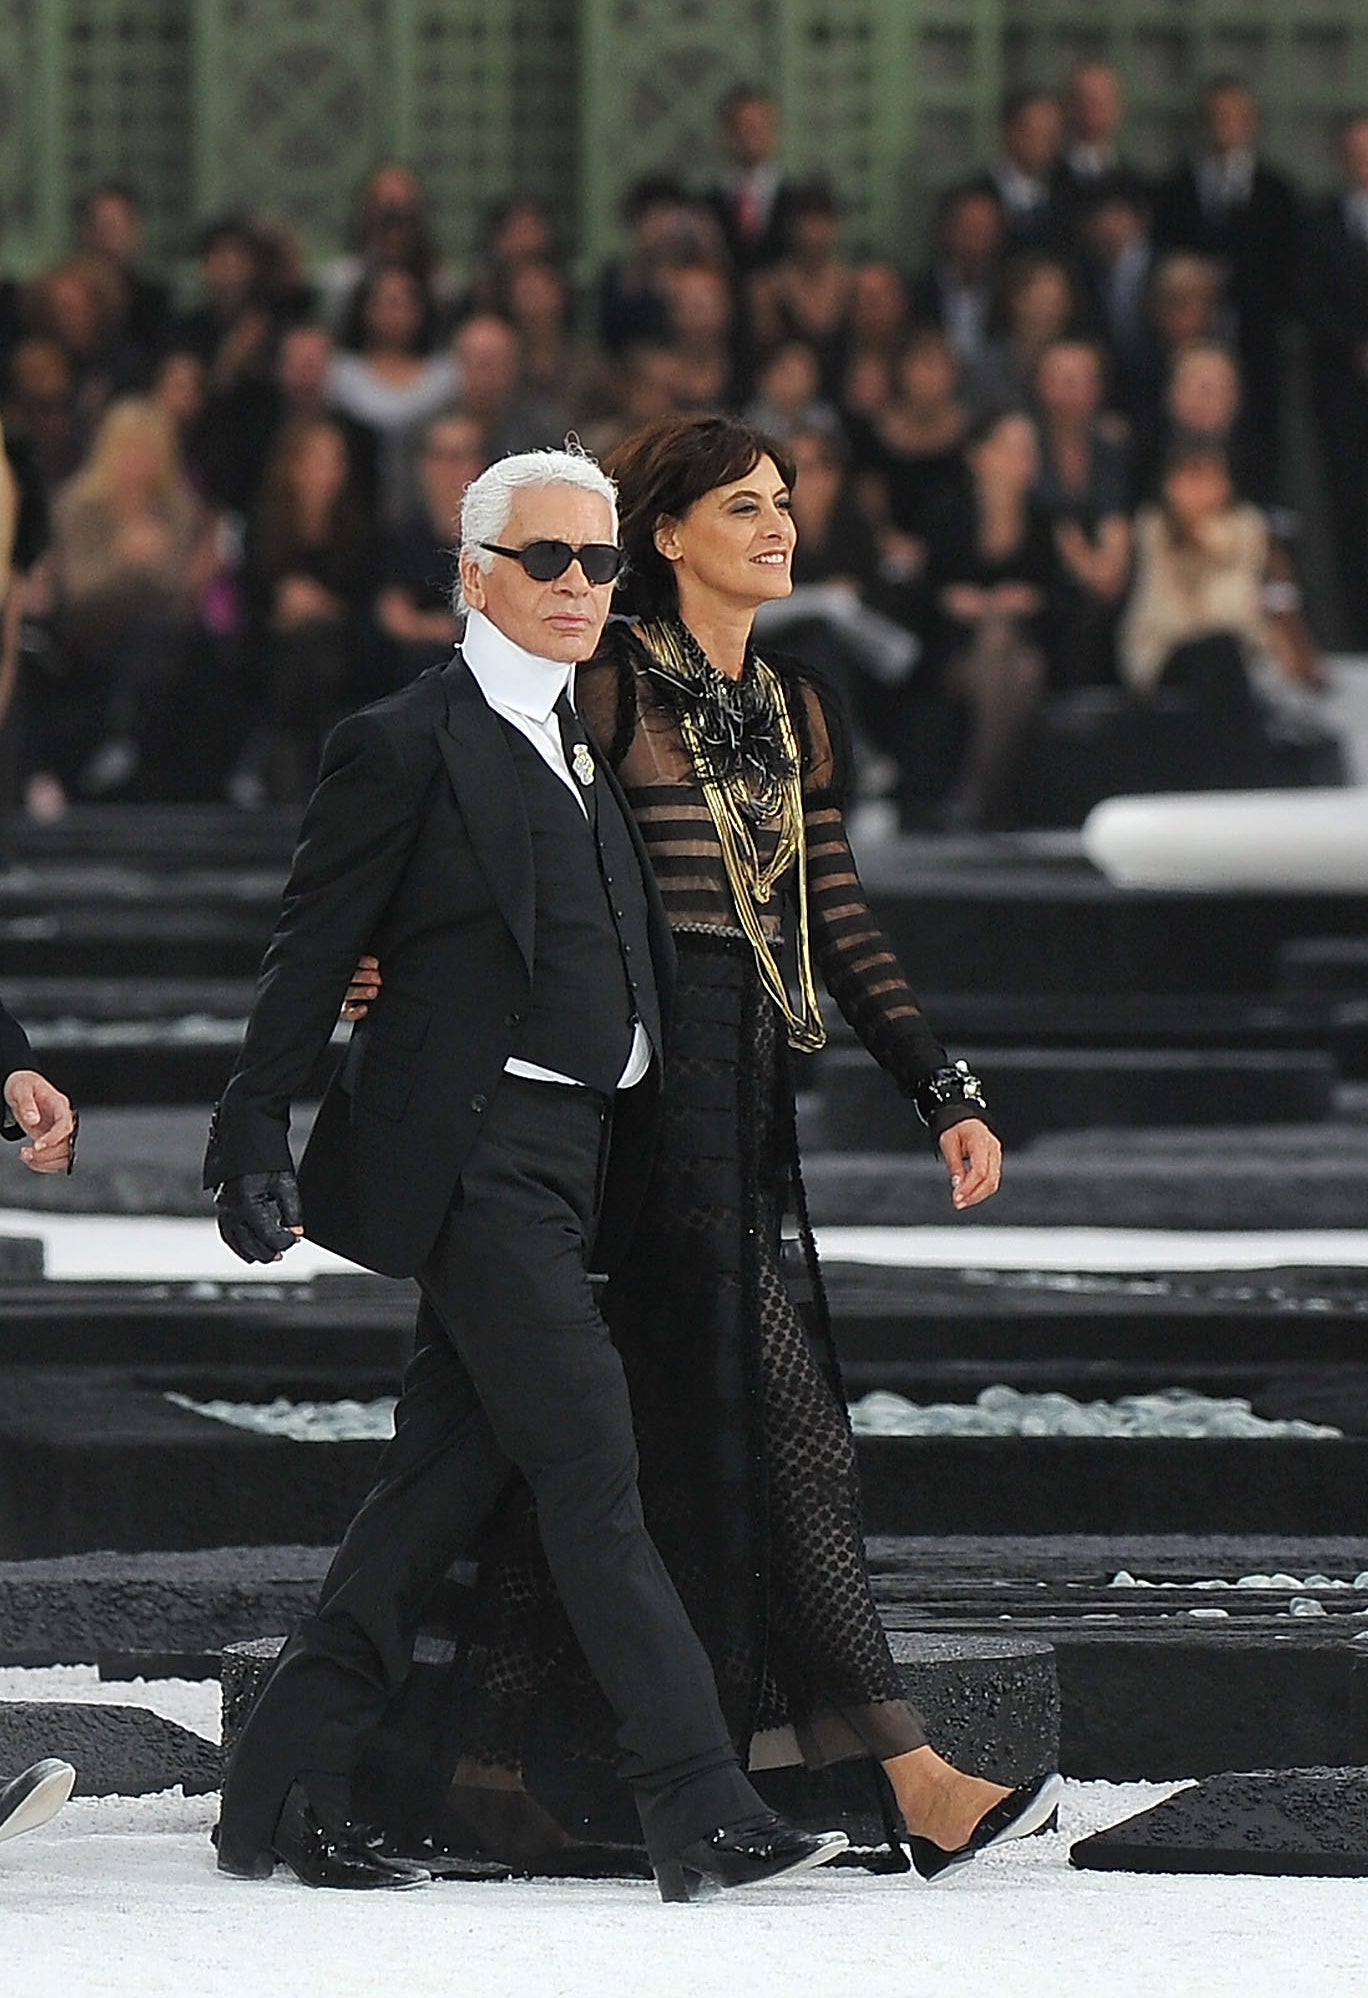 A model, Baptiste Giabiconi, Karl Lagerfeld and Ines de la Fressange walk the runway during the Chanel Ready to Wear Spring/Summer 2011 show during Paris Fashion Week